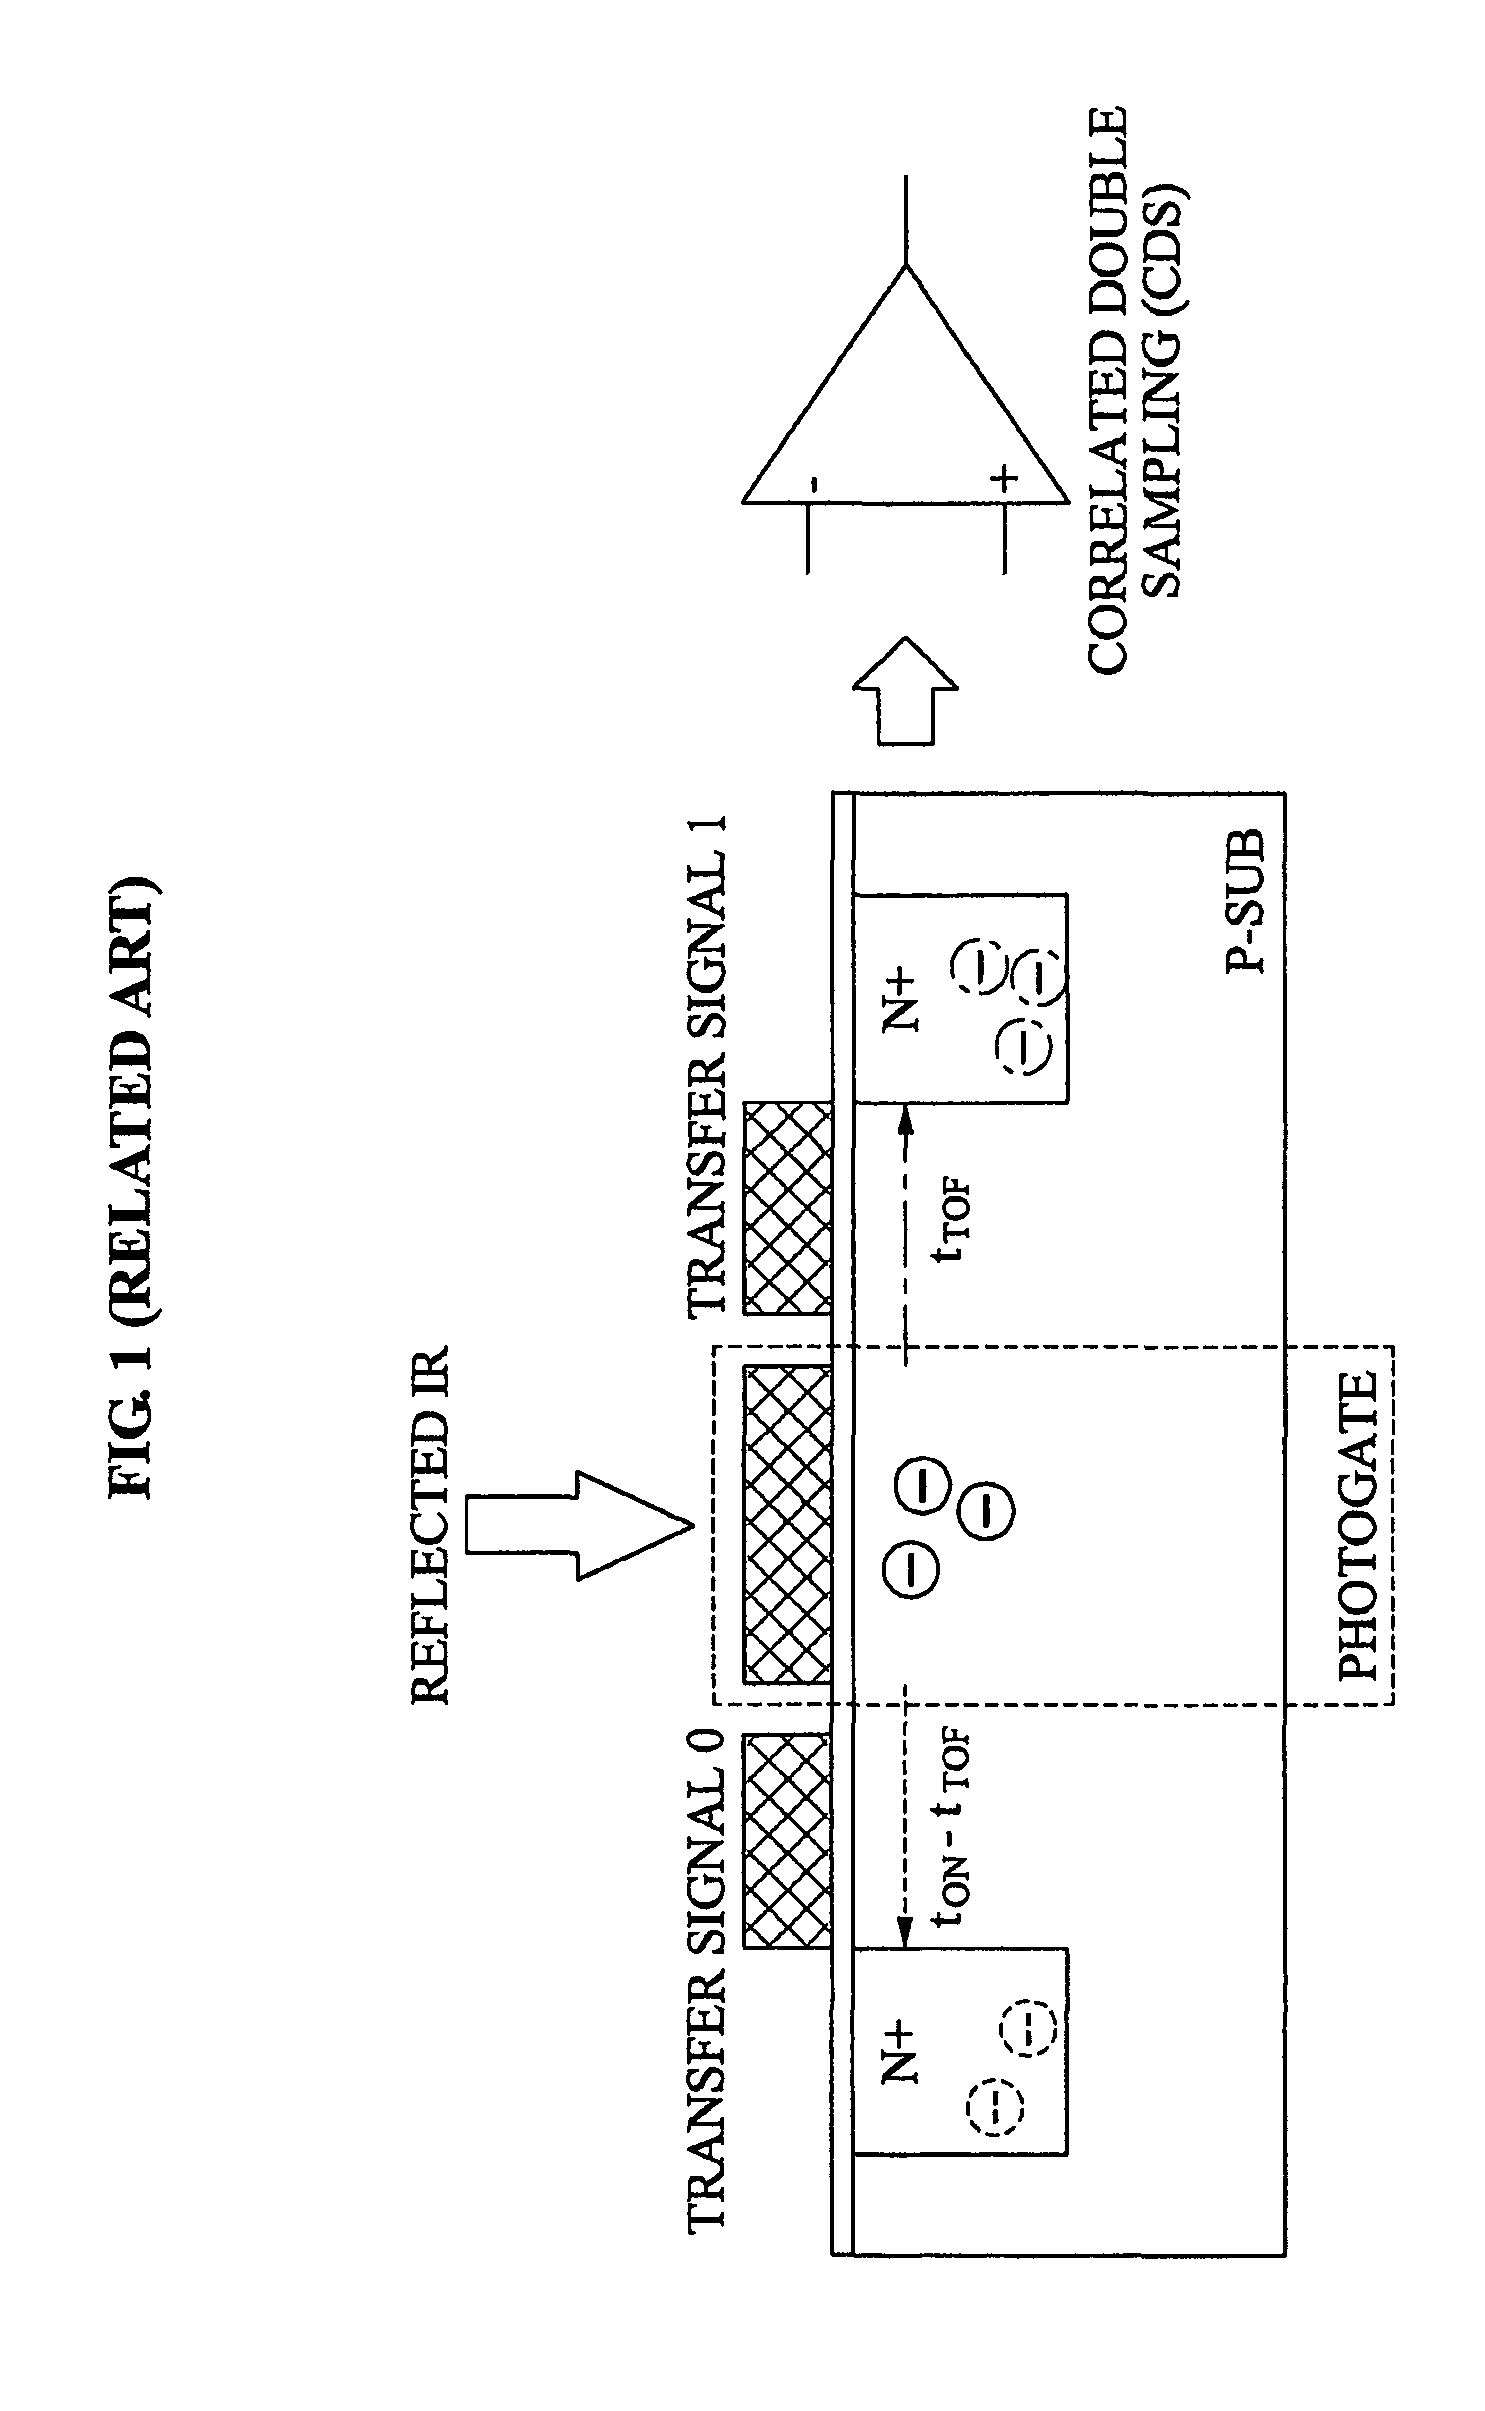 3D image processing method and apparatus for improving accuracy of depth measurement of an object in a region of interest